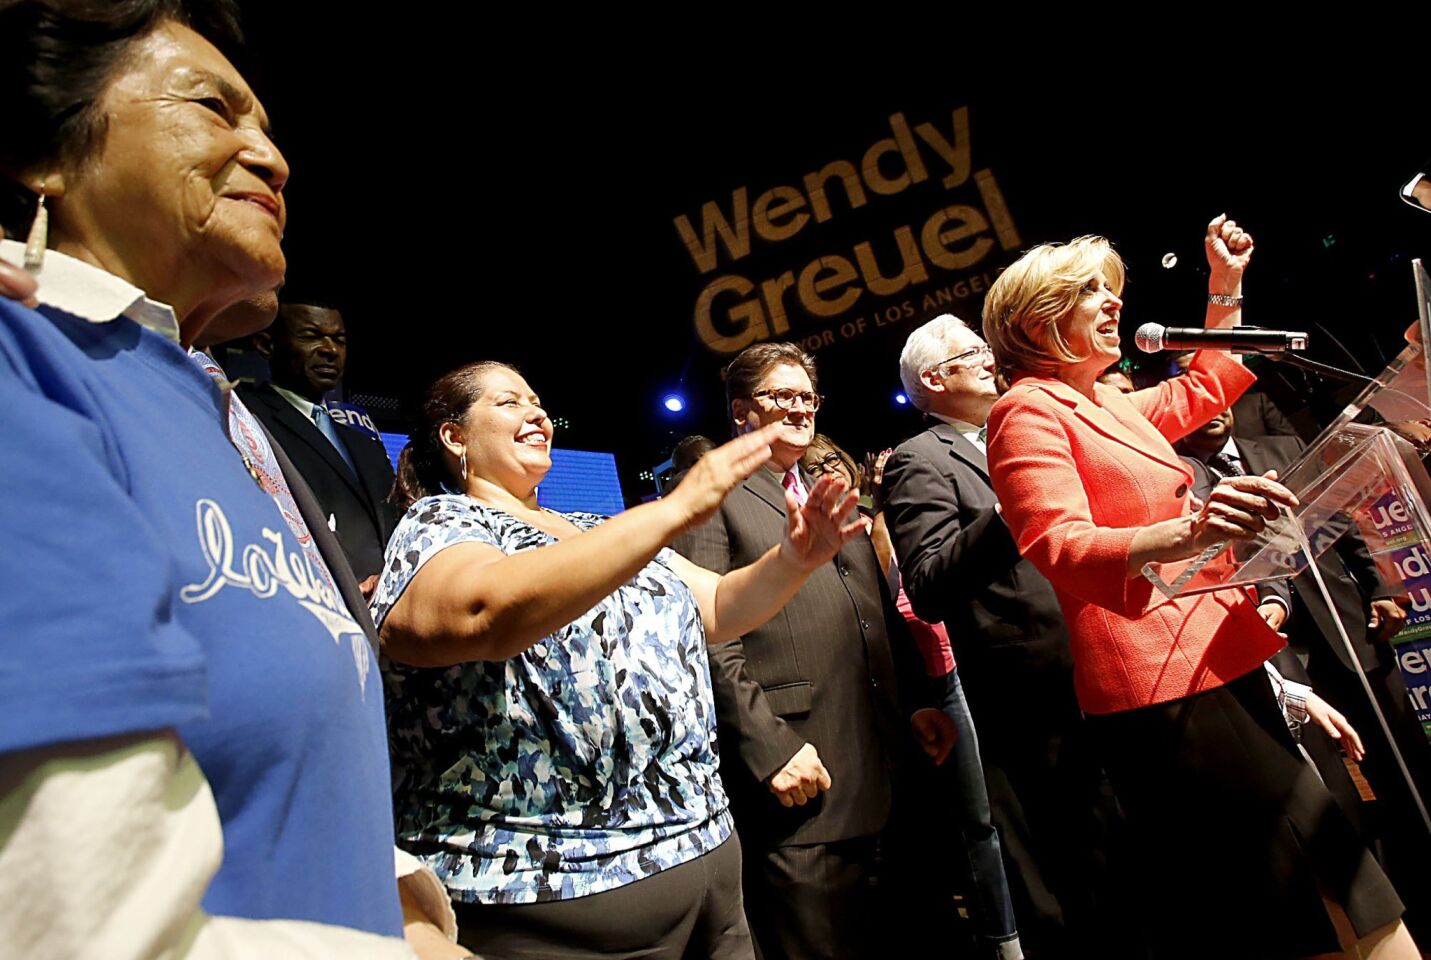 L.A. mayoral candidate Wendy Greuel and some supporters take the stage during an election night gathering at the old Pacific Stock Exchange.